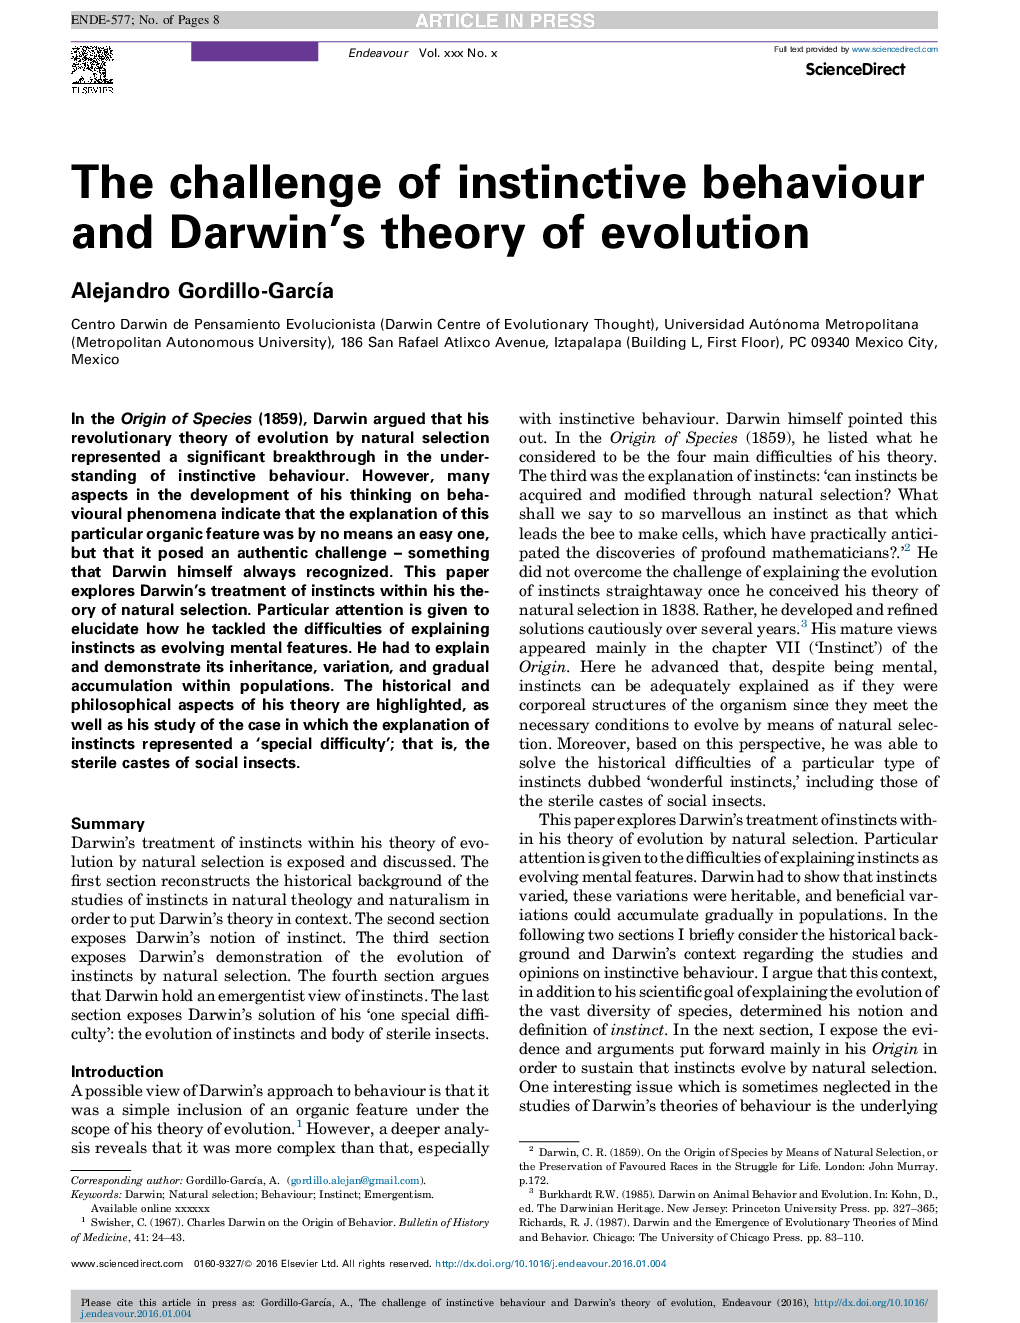 The challenge of instinctive behaviour and Darwin's theory of evolution